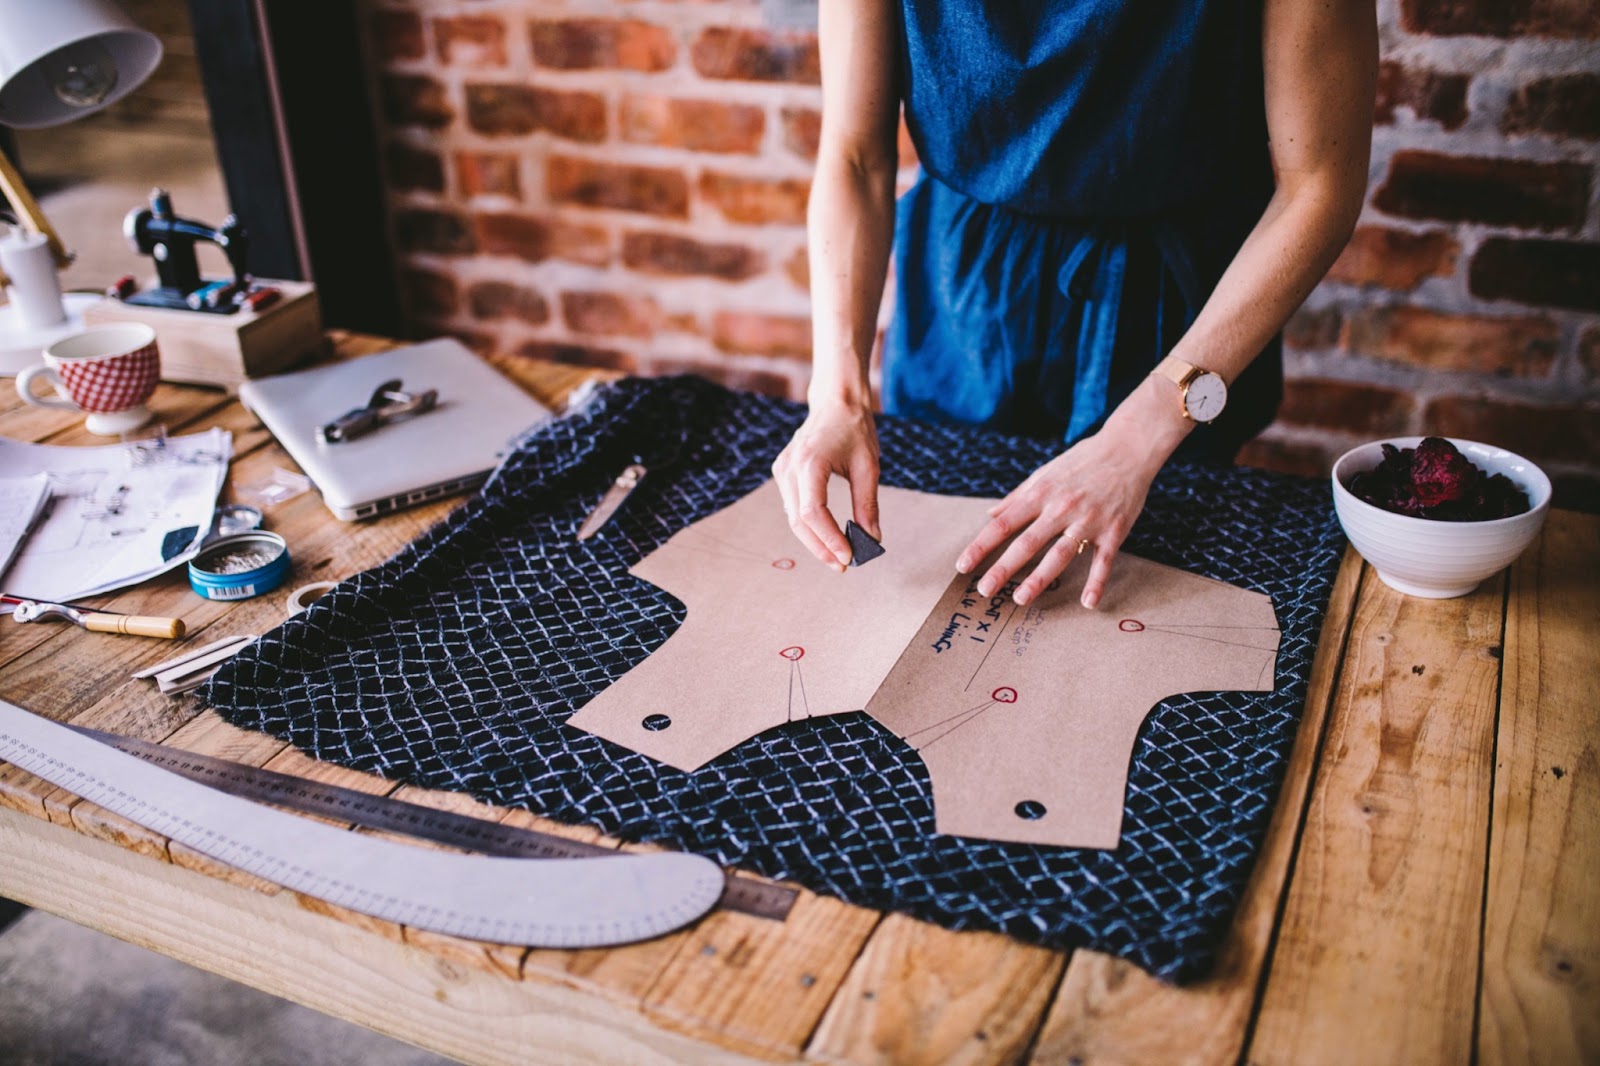 Why Micro-Factories Are a Great Fit for Producing a Clothing Line | MakersValley Blog